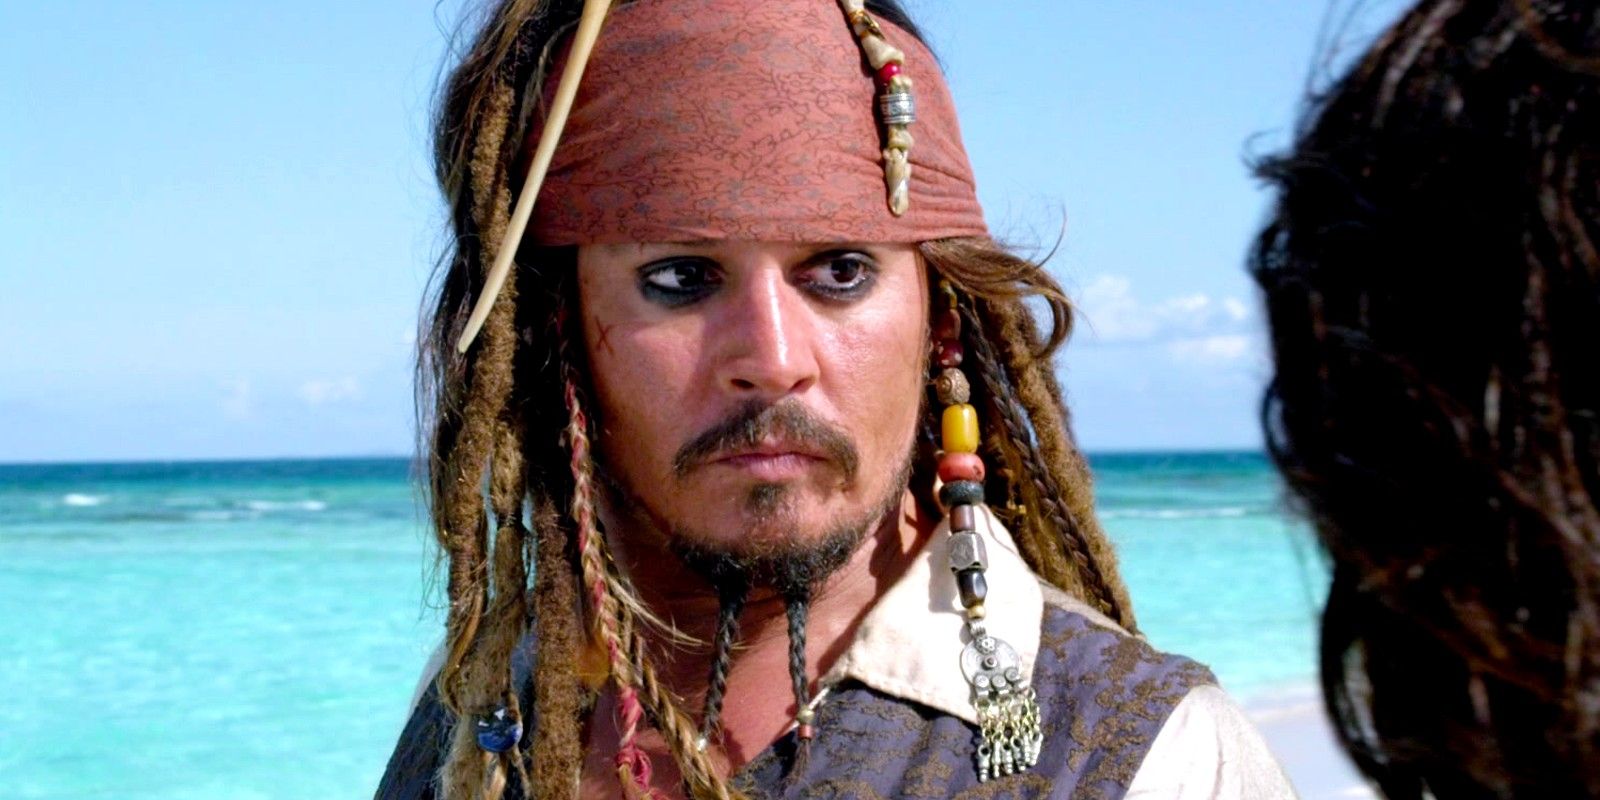 Johnny Depp as Captain Jack Sparrow looking at Penelope Cruz in Pirates of the Caribbean 5